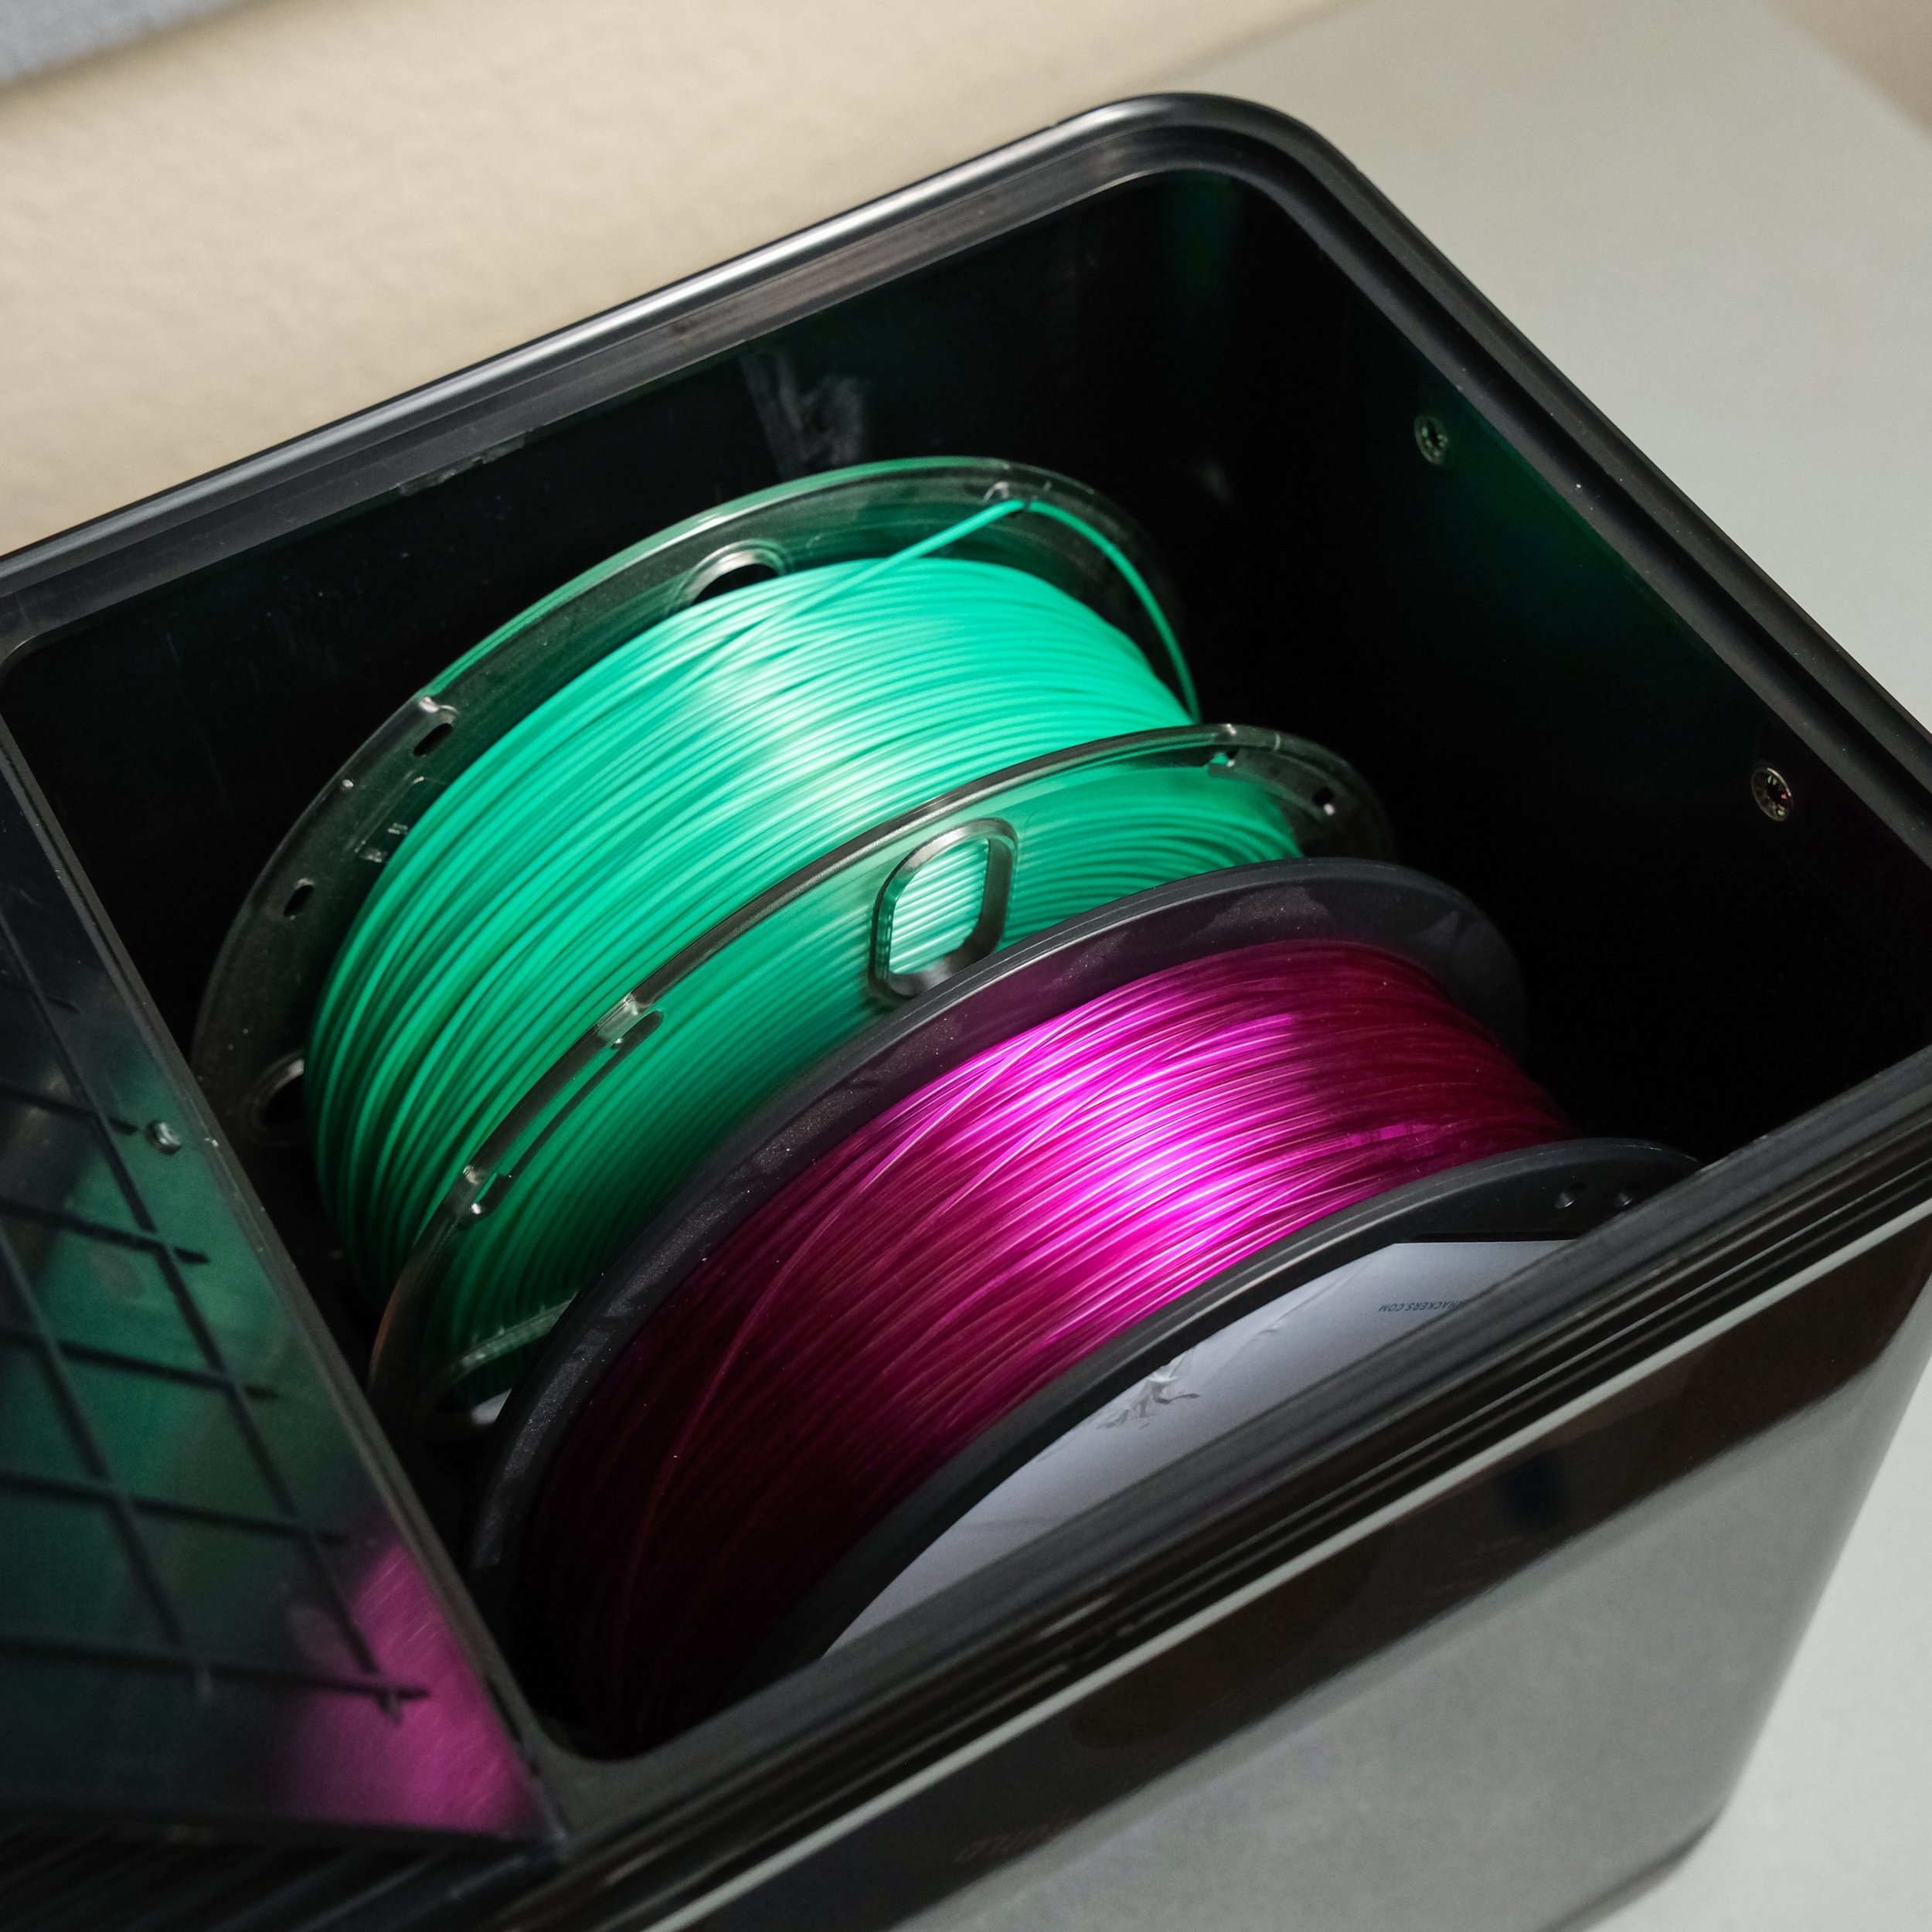 Two 1kg filament spools fit comfortably on each side of the machine.